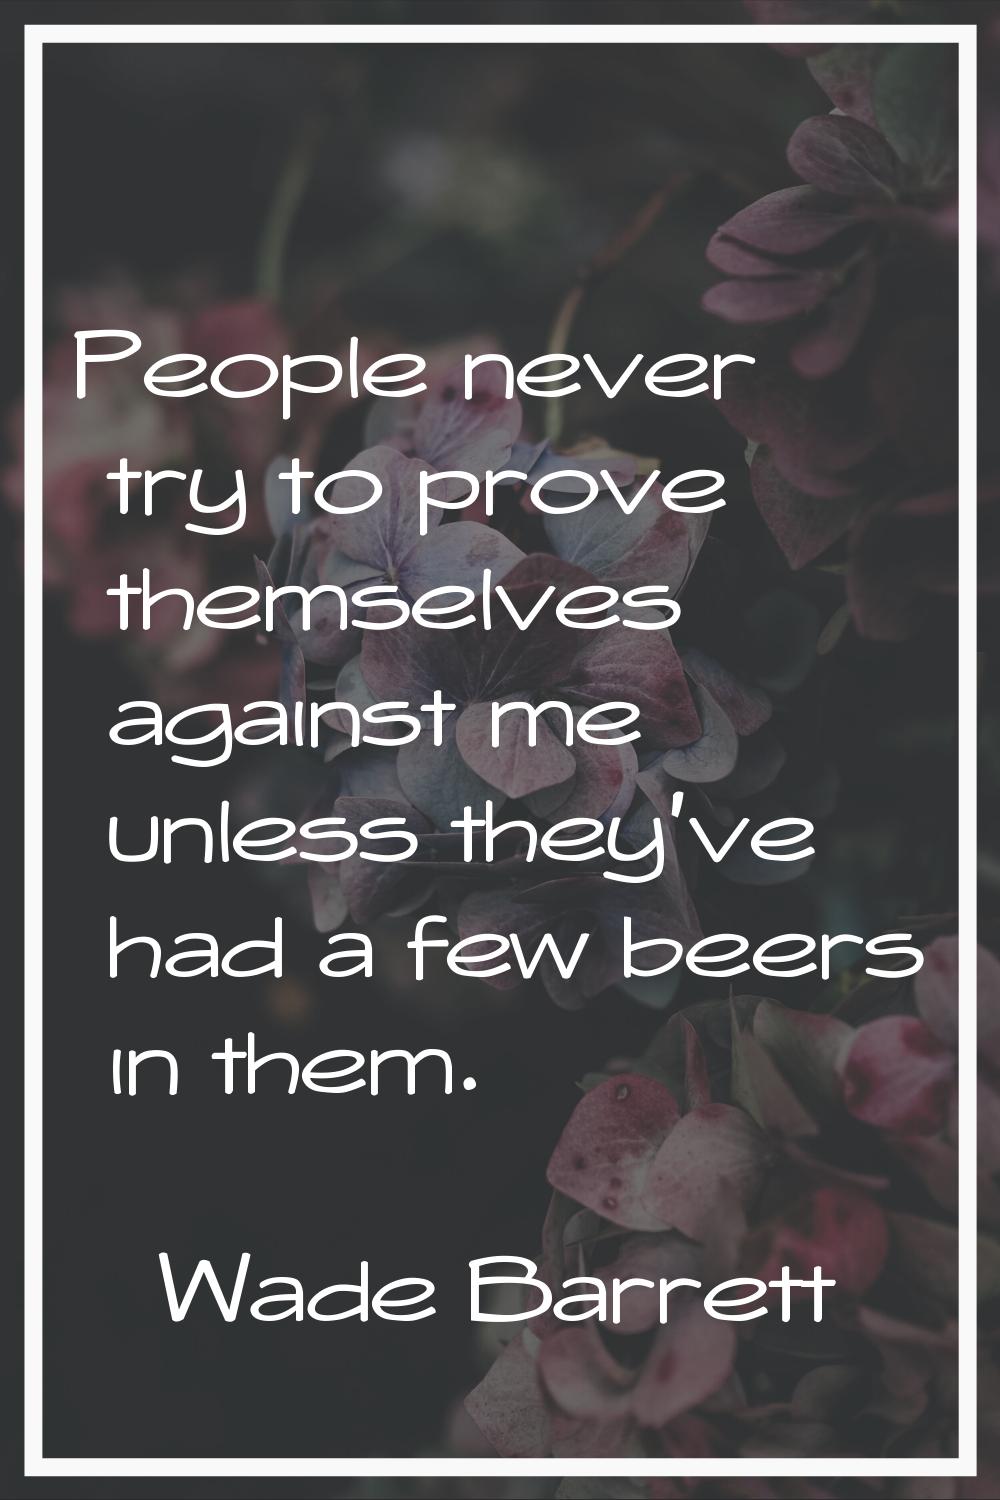 People never try to prove themselves against me unless they've had a few beers in them.